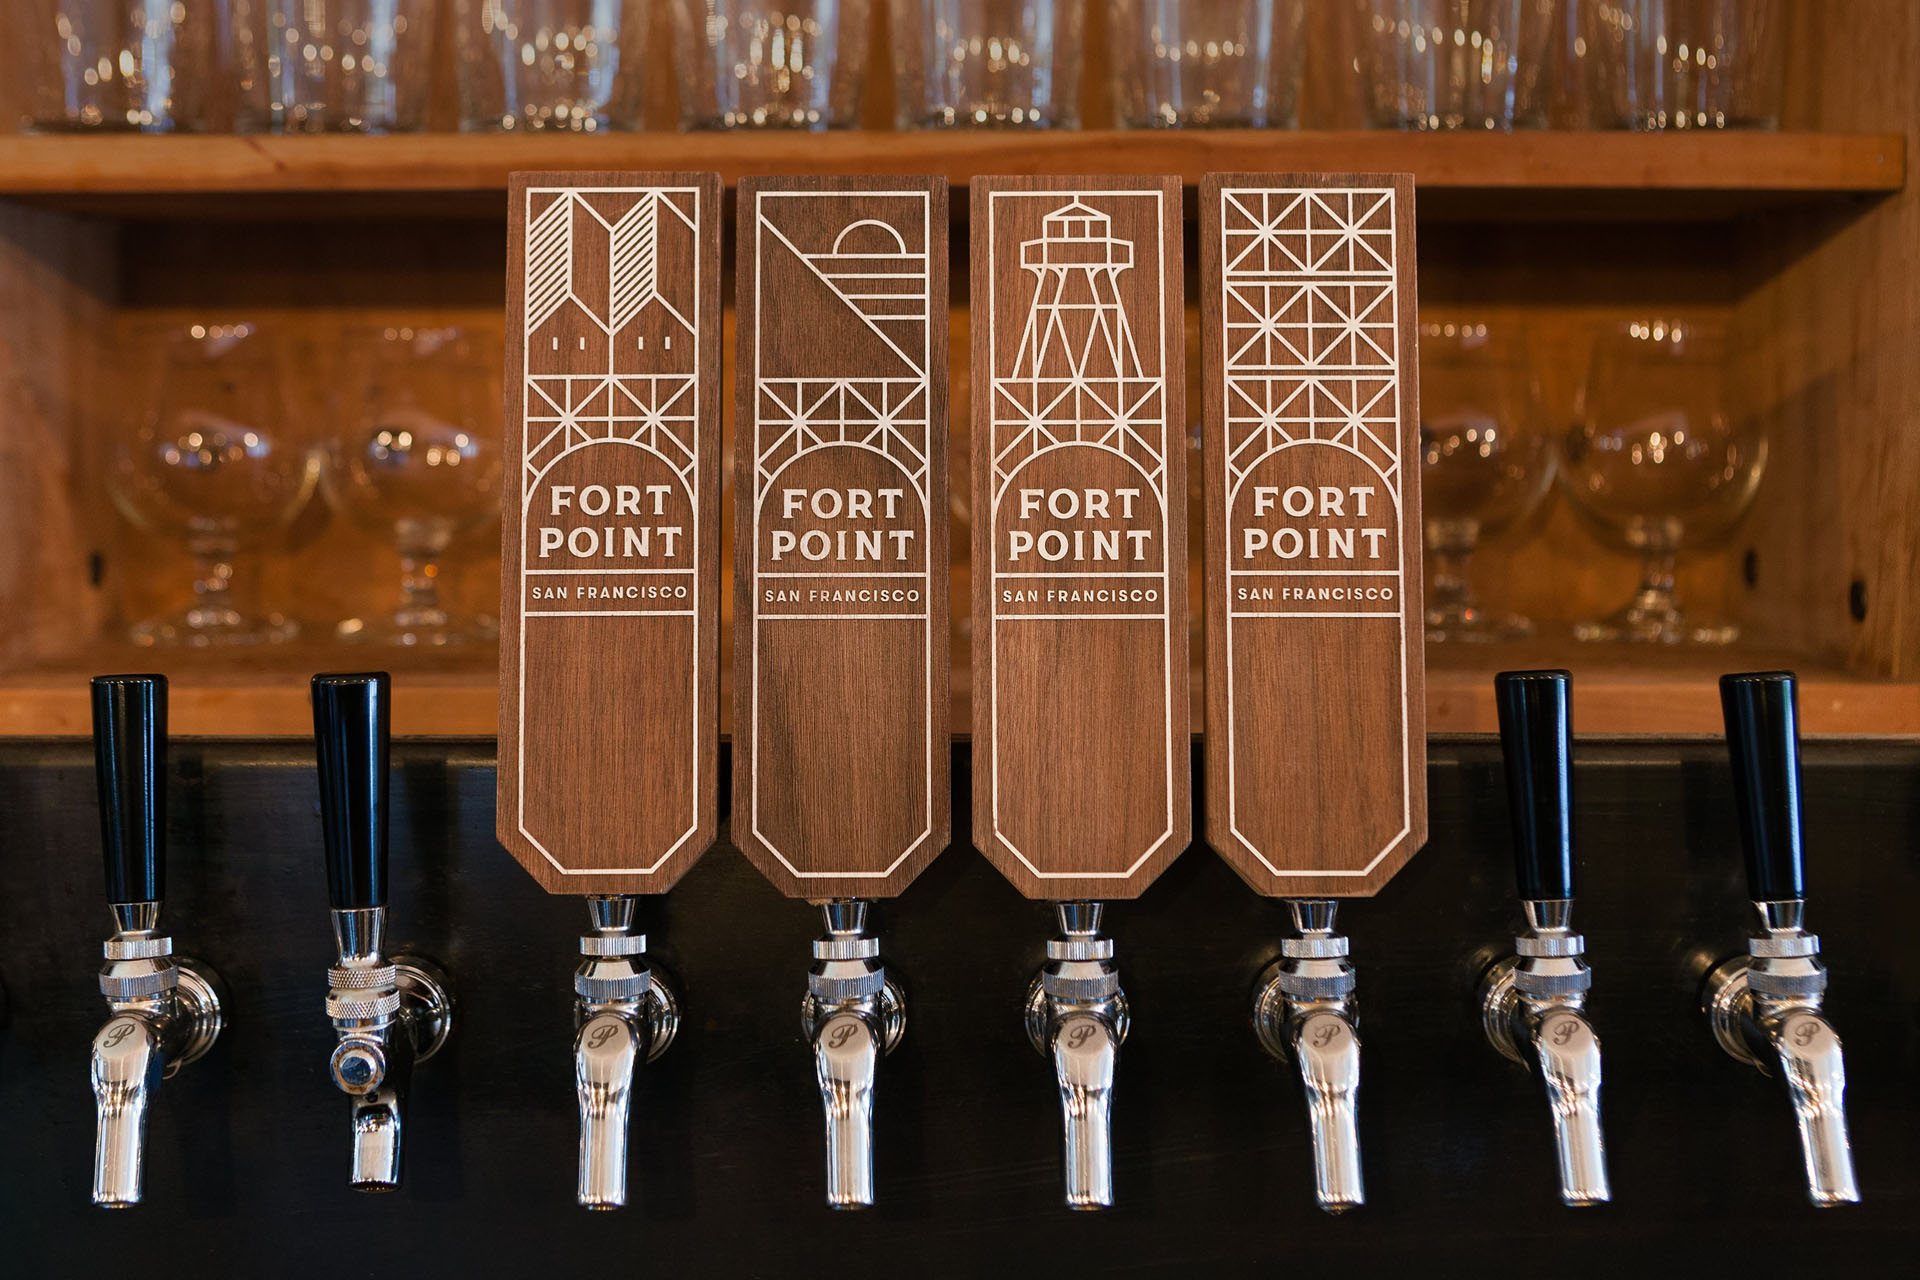 Beer taps showing repetition in graphic design